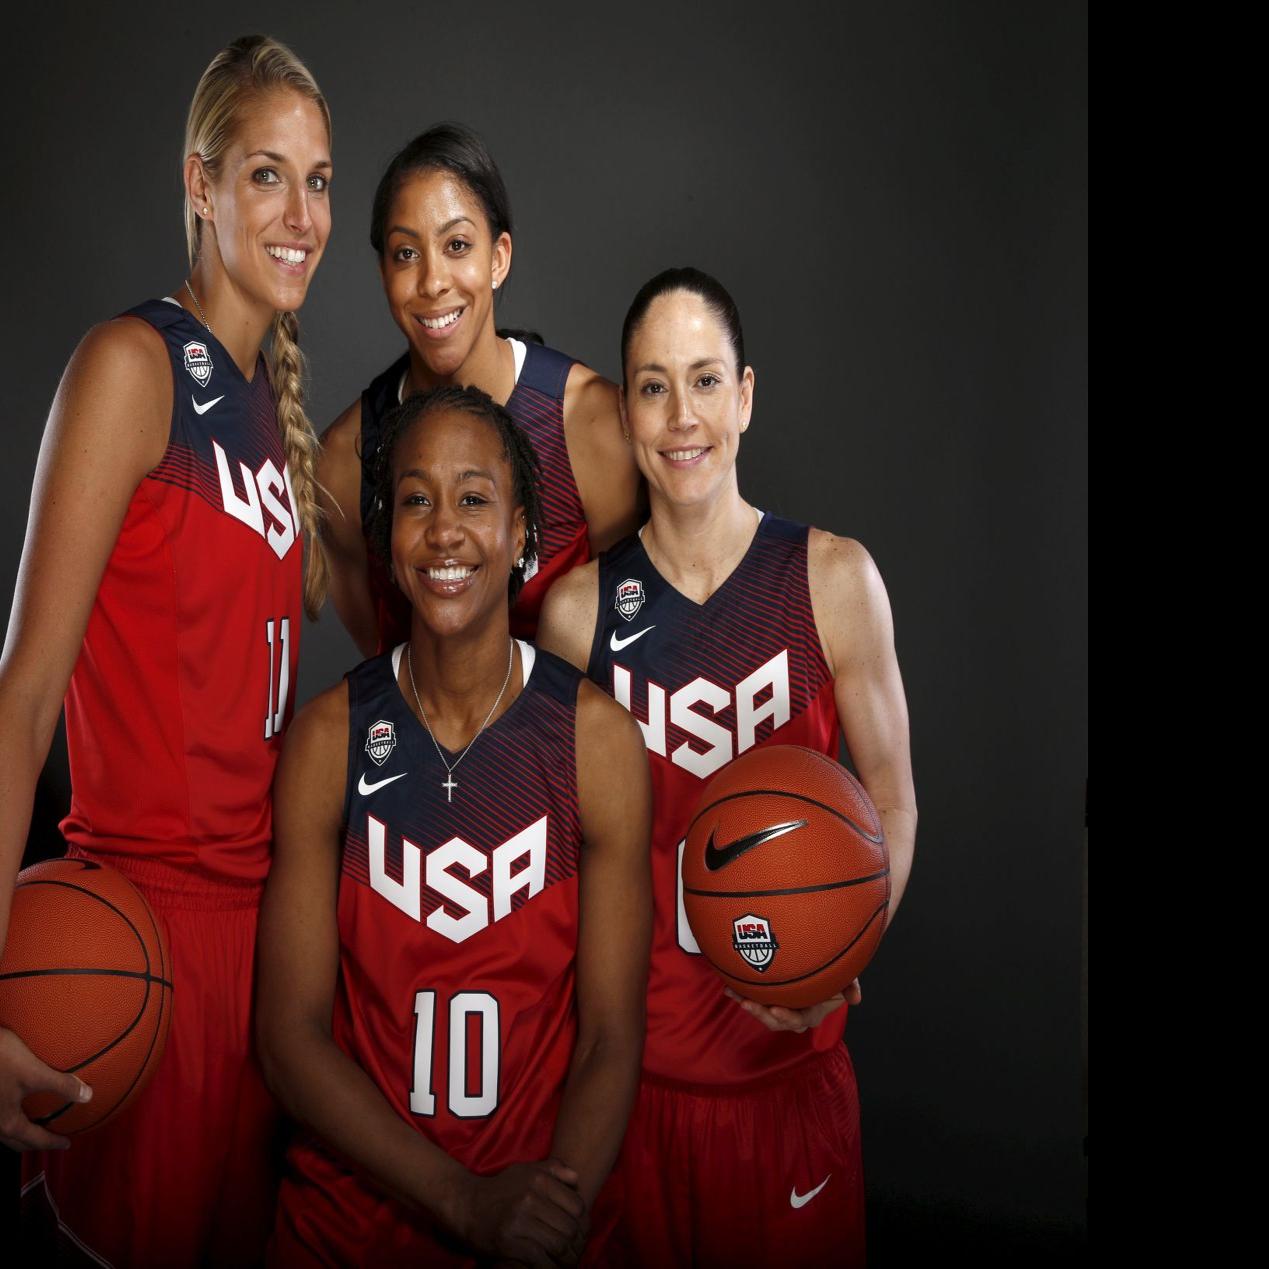 U.S. Olympic women's basketball team announced, has local ties in Tamika  Catchings, Brittney Griner